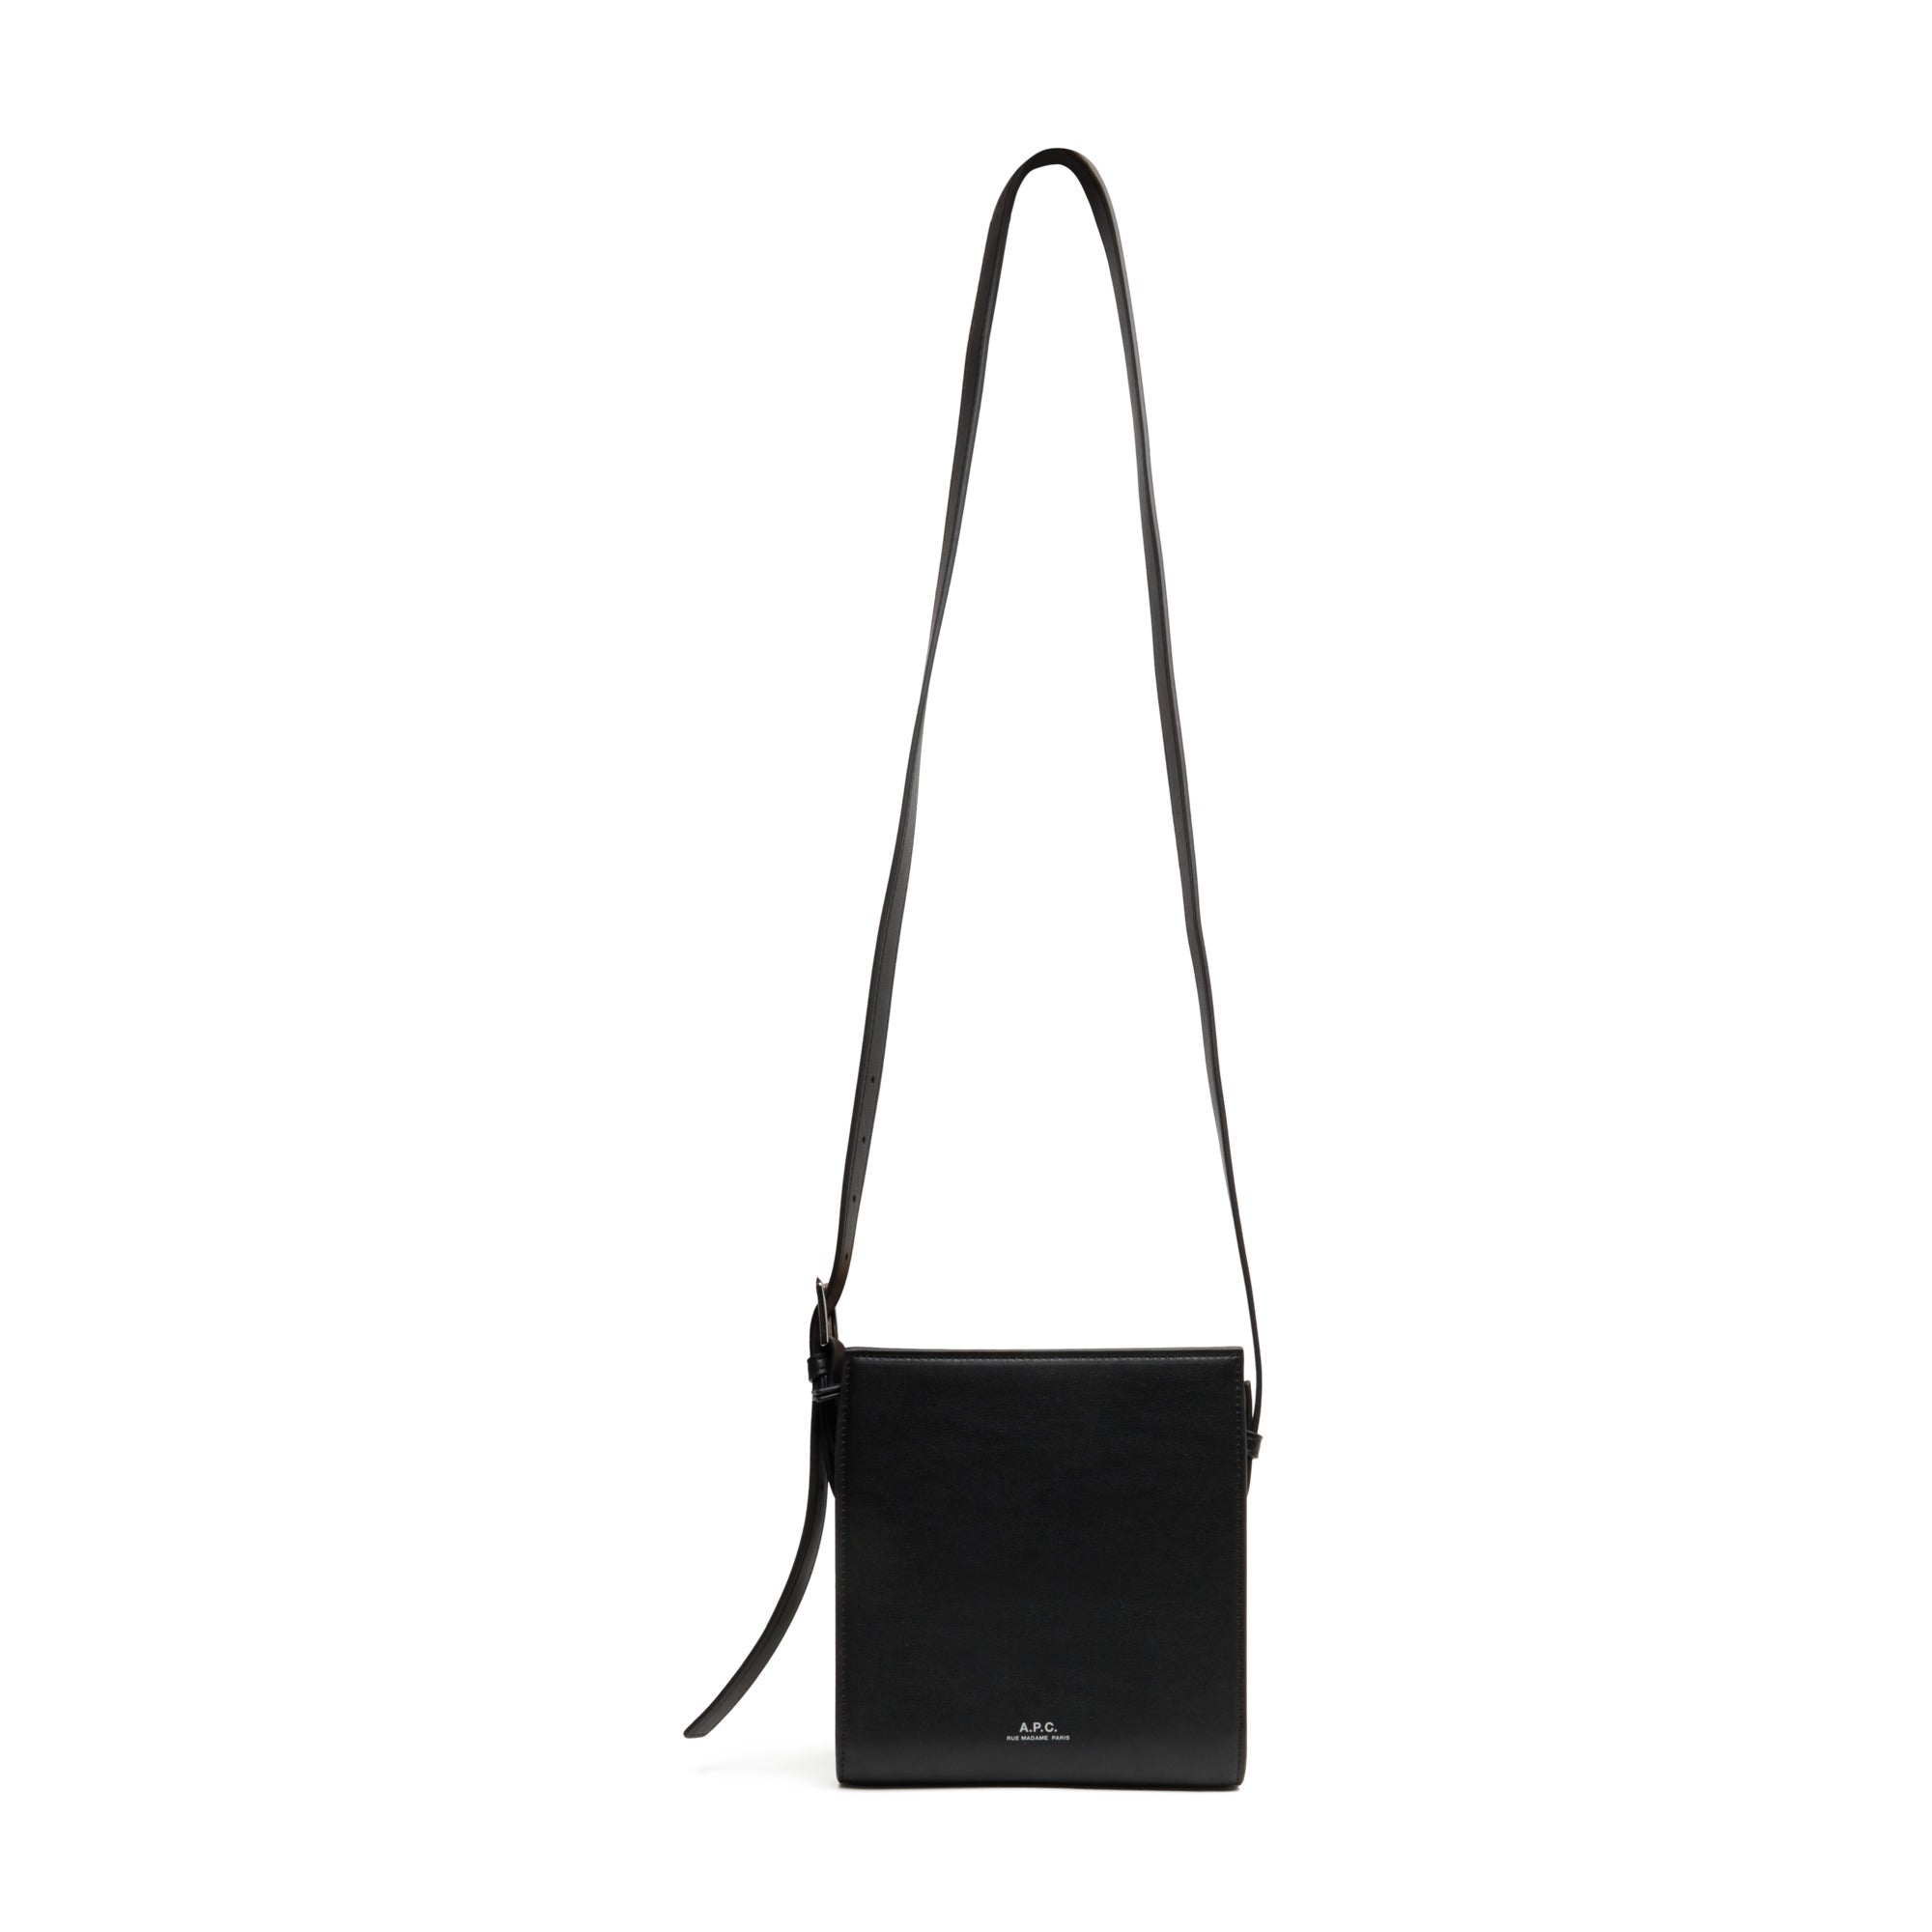 Nino bag | Recycled leather-look material | A.P.C. Accessories